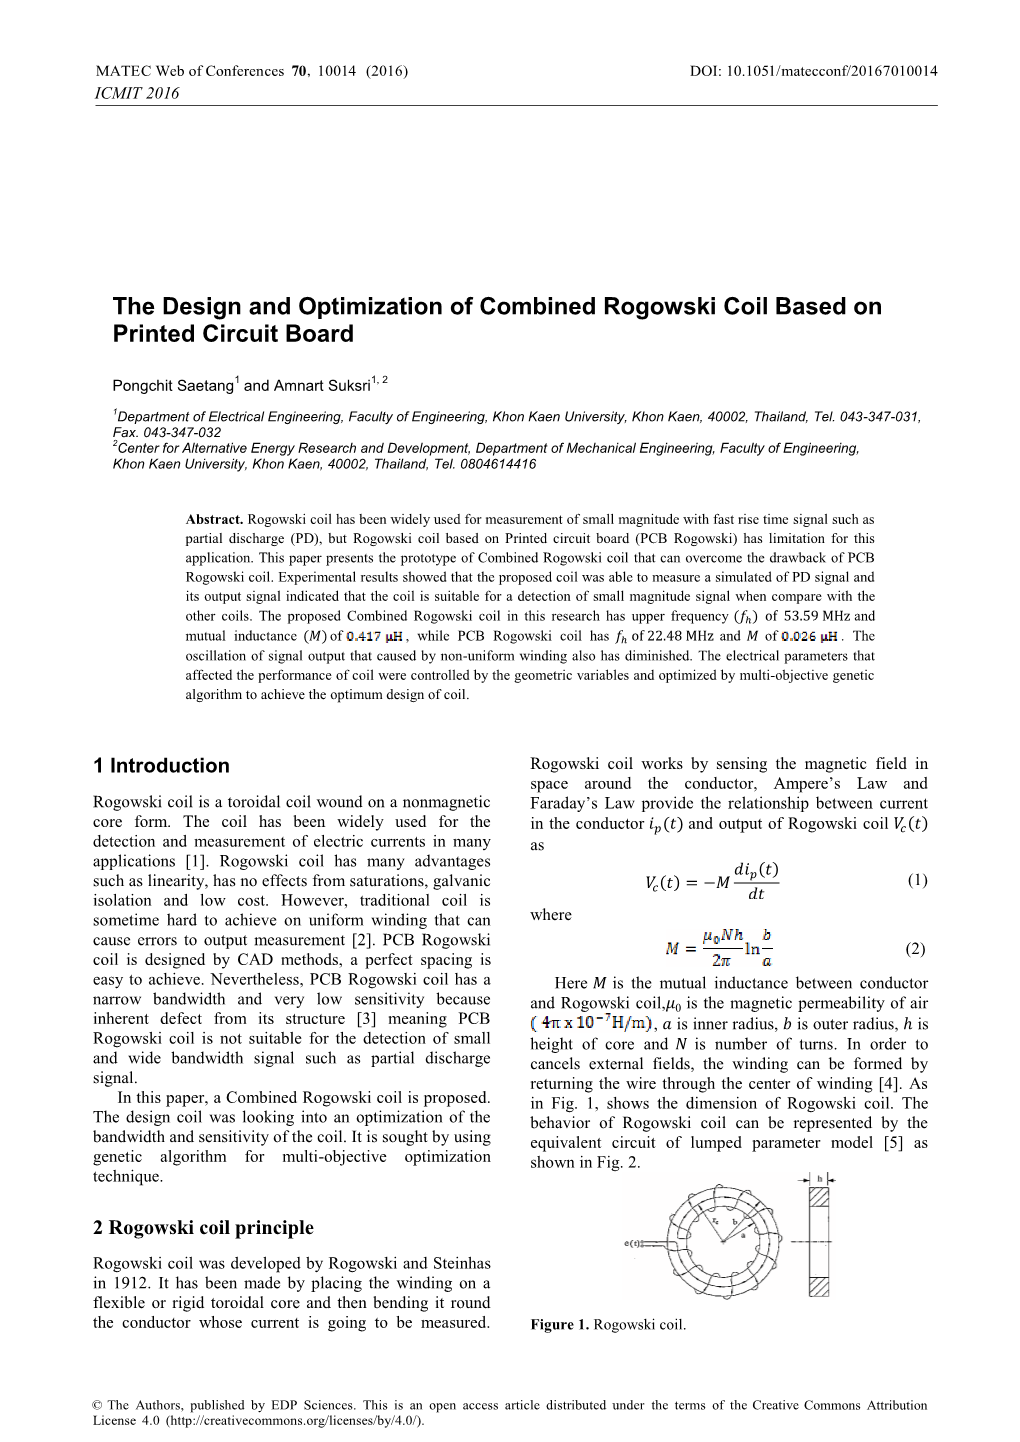 The Design and Optimization of Combined Rogowski Coil Based on Printed Circuit Board